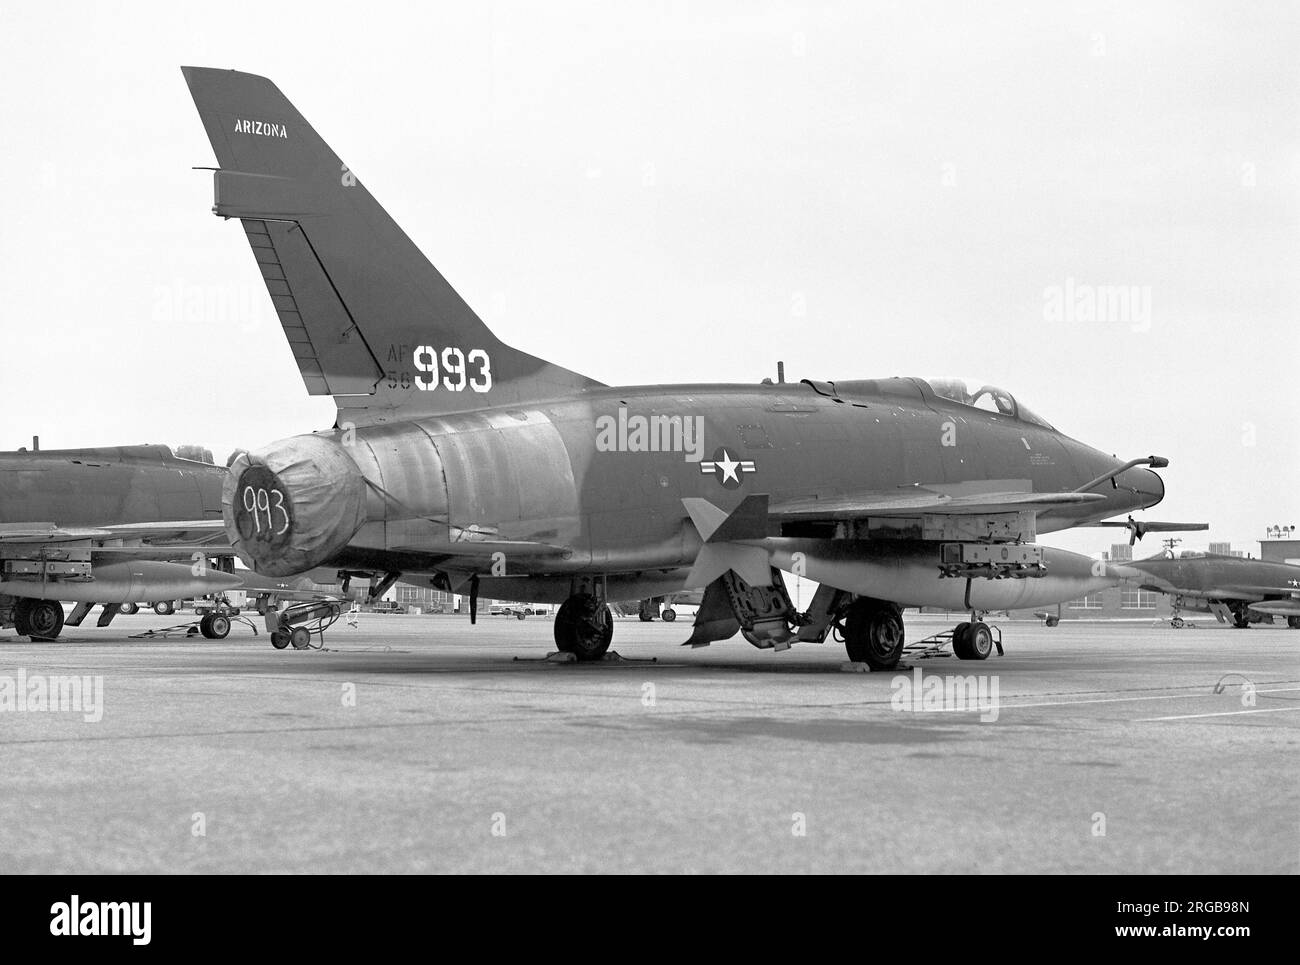 United States Air Force - North American F-100D-65-NA Super Sabre 56-2993 (msn 235-91), of the Arizona Air National Guard, at Tucson in January 1976. Stock Photo